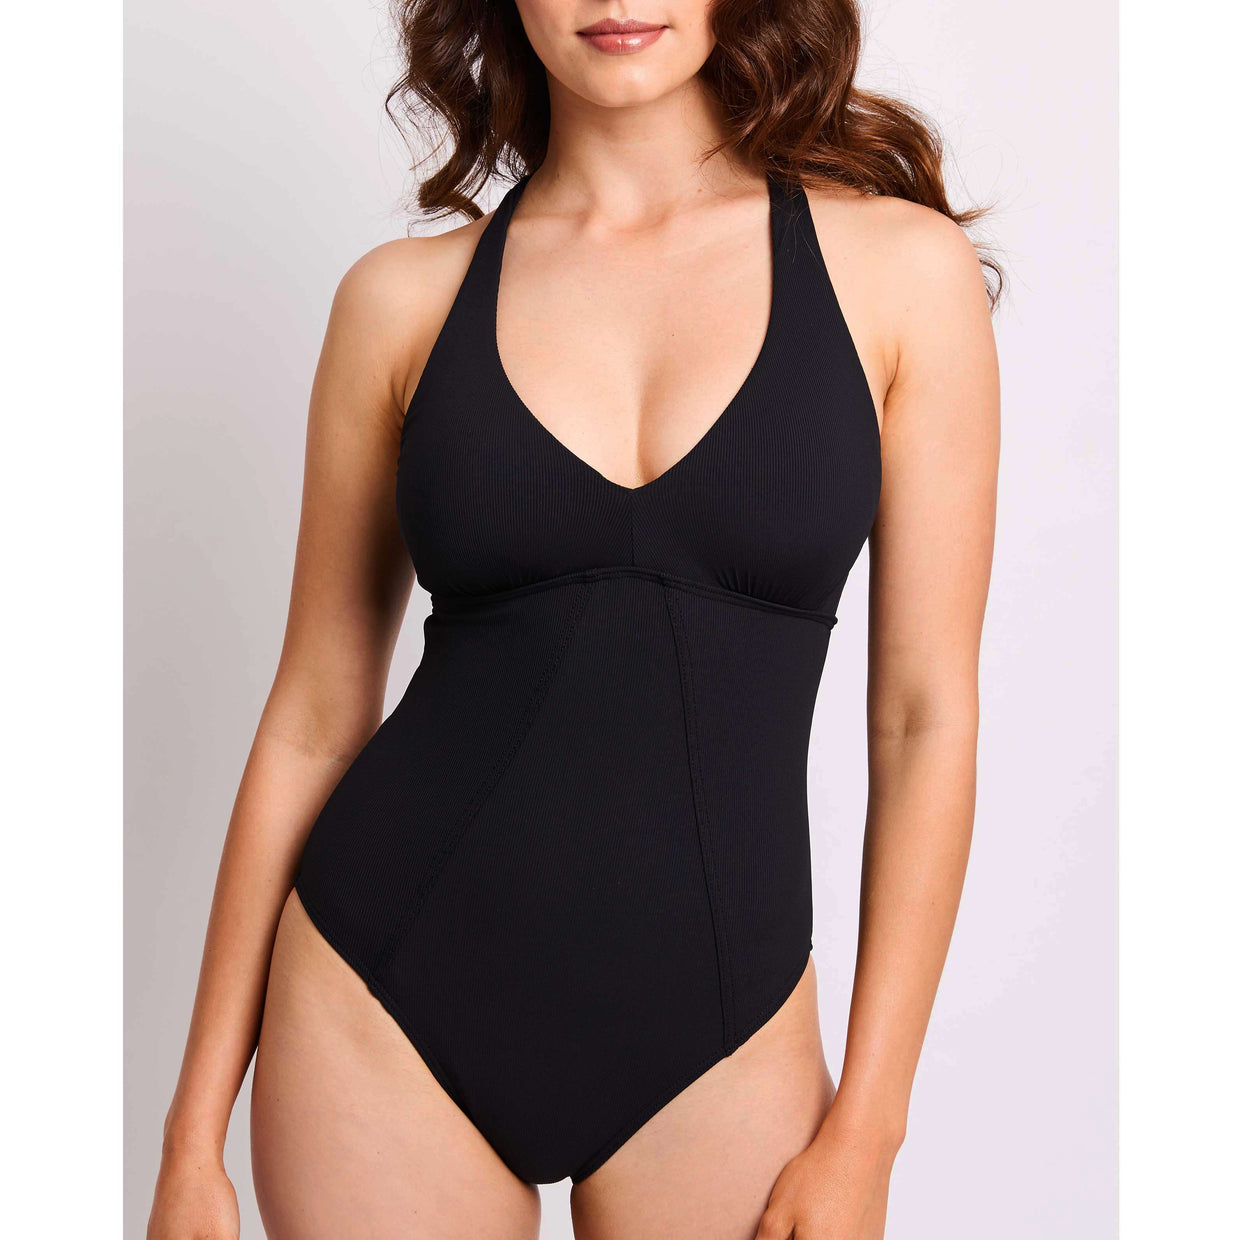 Janet One Piece Ribbed Black wore by Brooke @what_brooke_wore 2